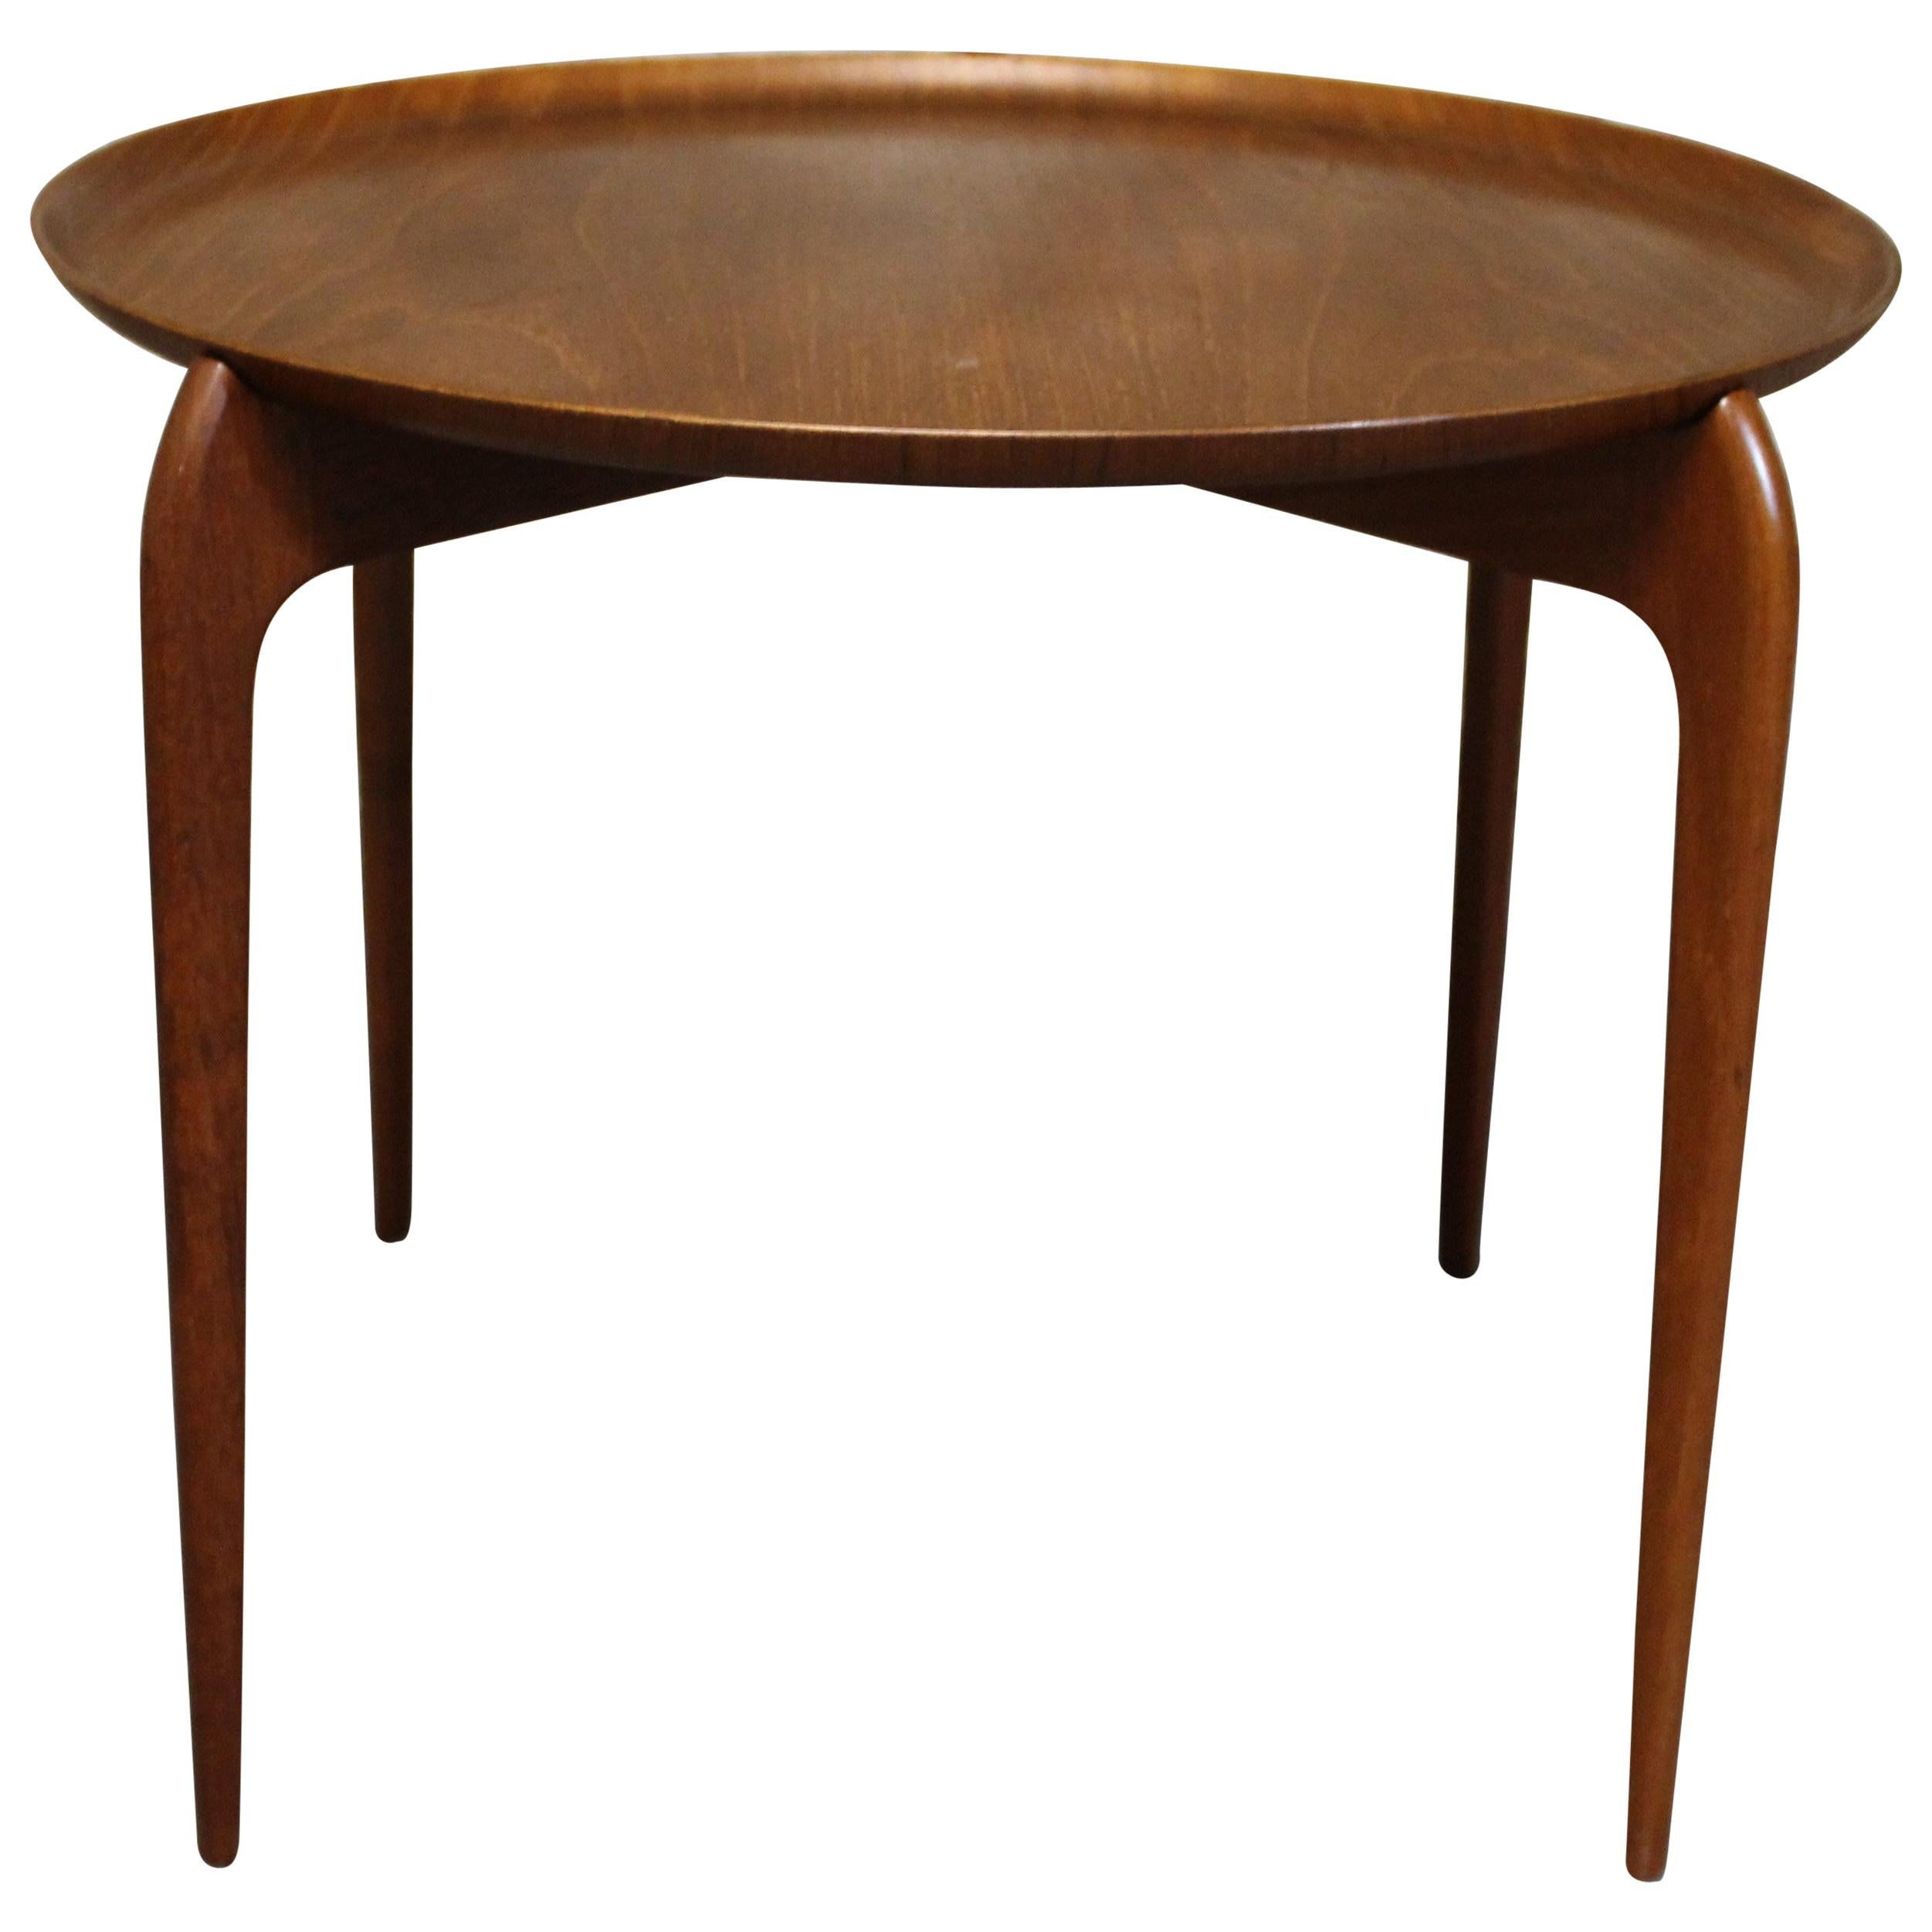 Willumsen & Engholm Danish Teak Side Table with Removable Tray Top